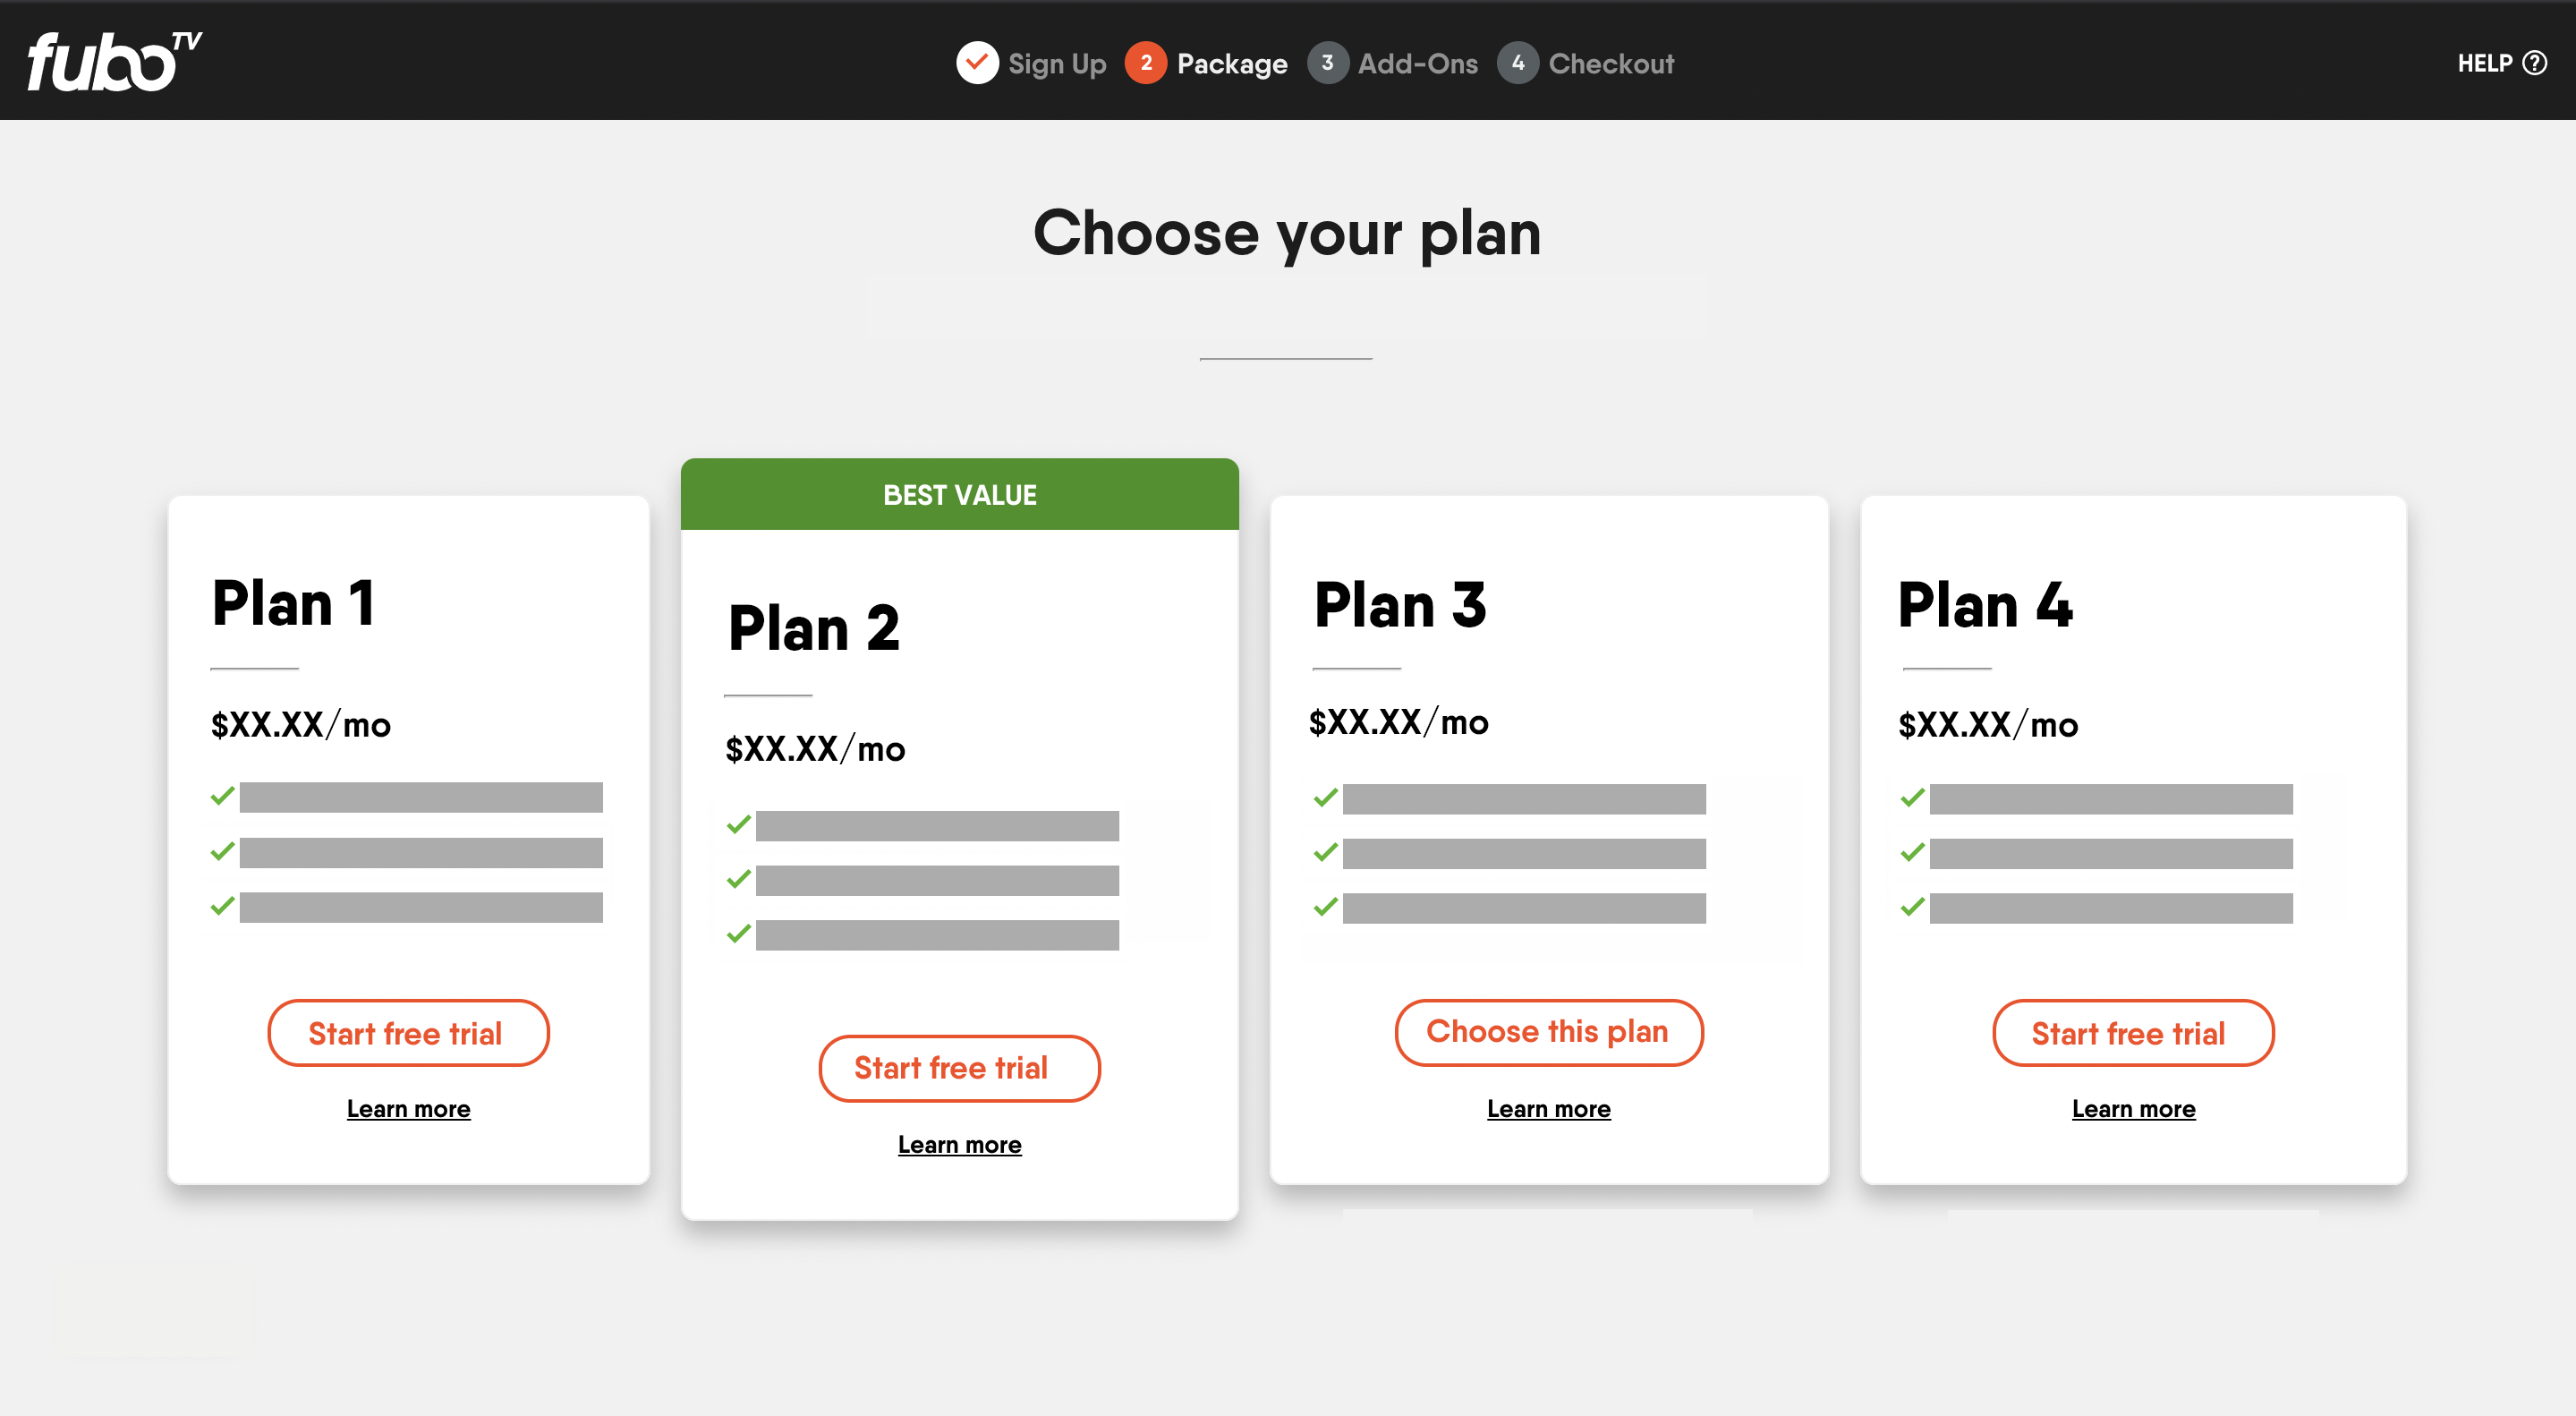 Generic plan selection screen for FuboTV; choose the plan that best first what you're looking for